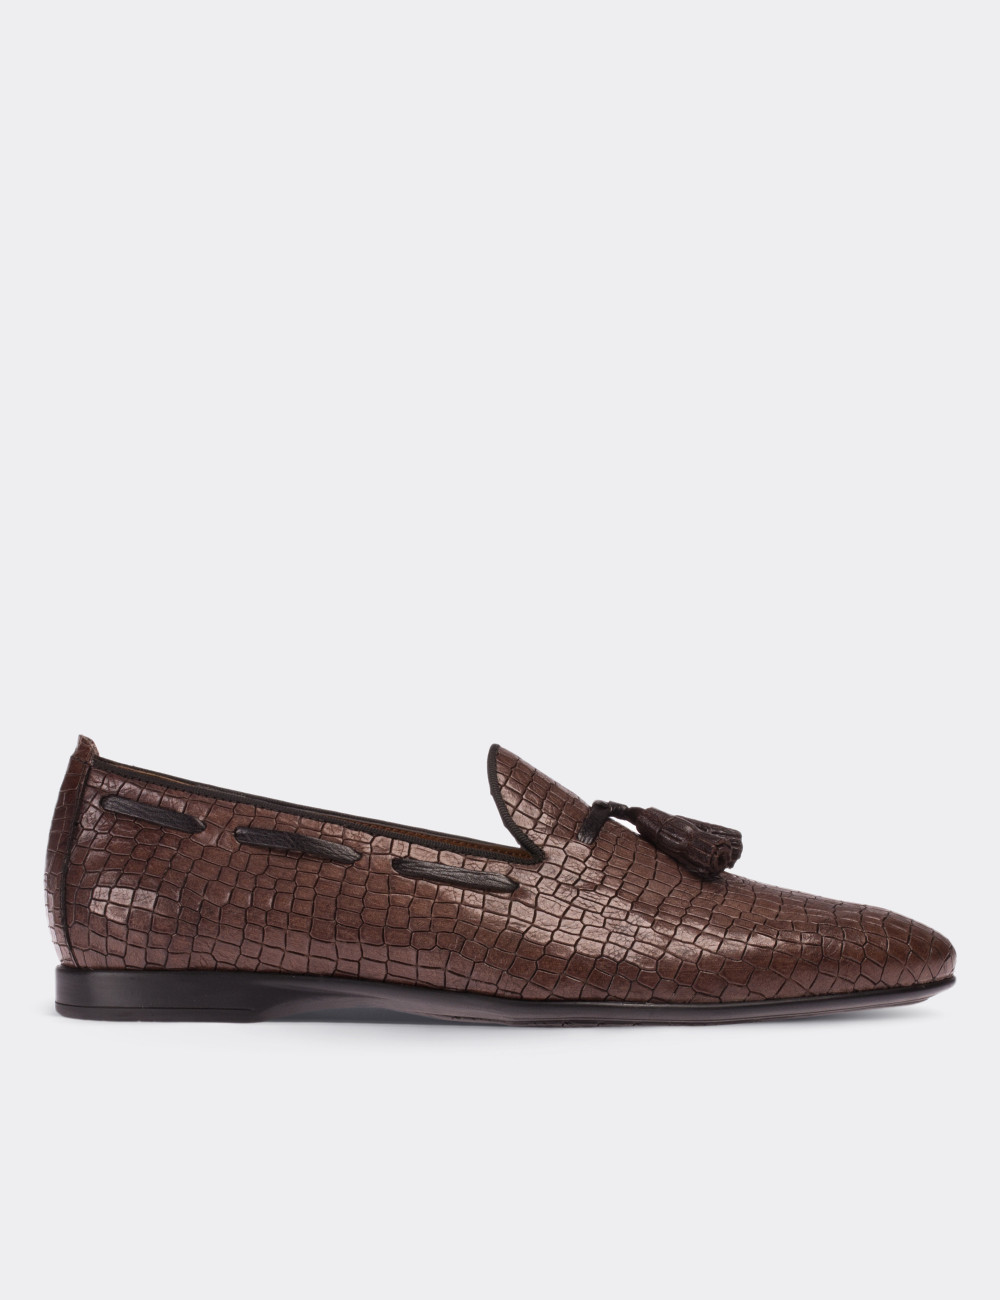 Sandstone  Leather Loafers - 01643MVZNC02